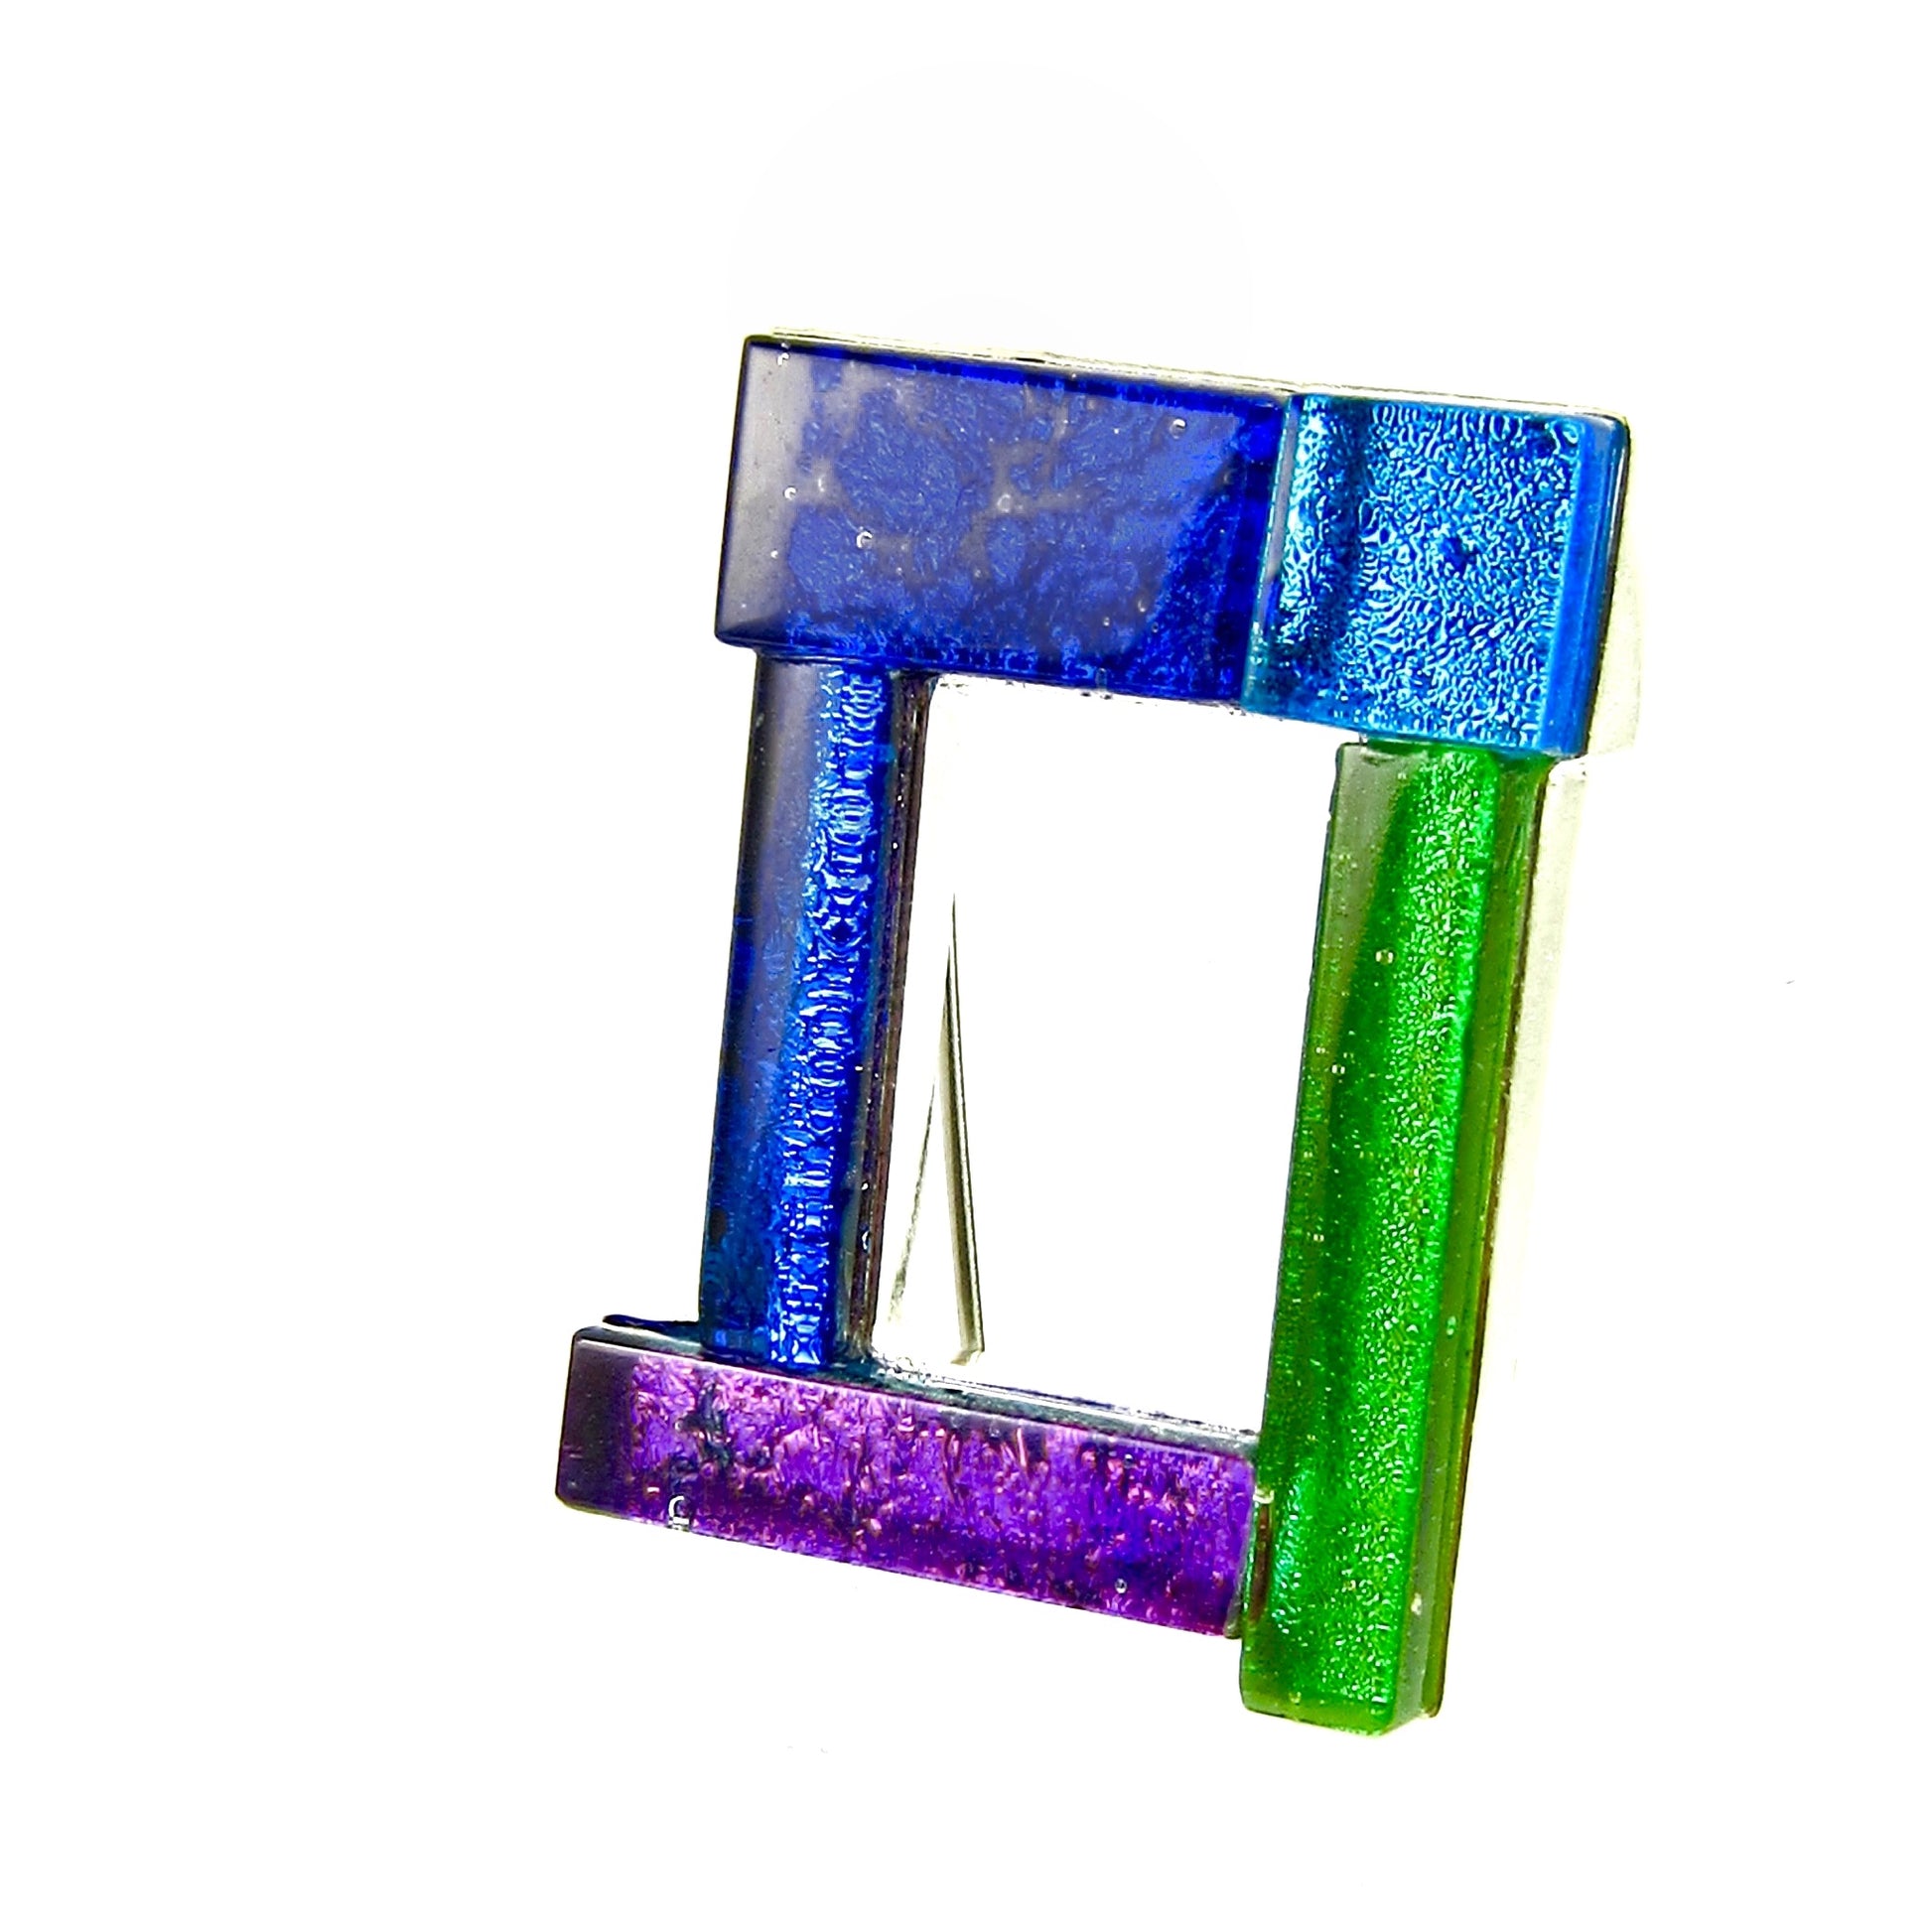 open rectangle brooch, blue, purple, green pin, fused glass, glass jewelry, glass and silver jewelry, handmade, handcrafted, American Craft, hand fabricated jewelry, hand fabricated jewellery,  Athen, Georgia, colorful jewelry, sparkle, bullseye glass, dichroic glass, art jewelry